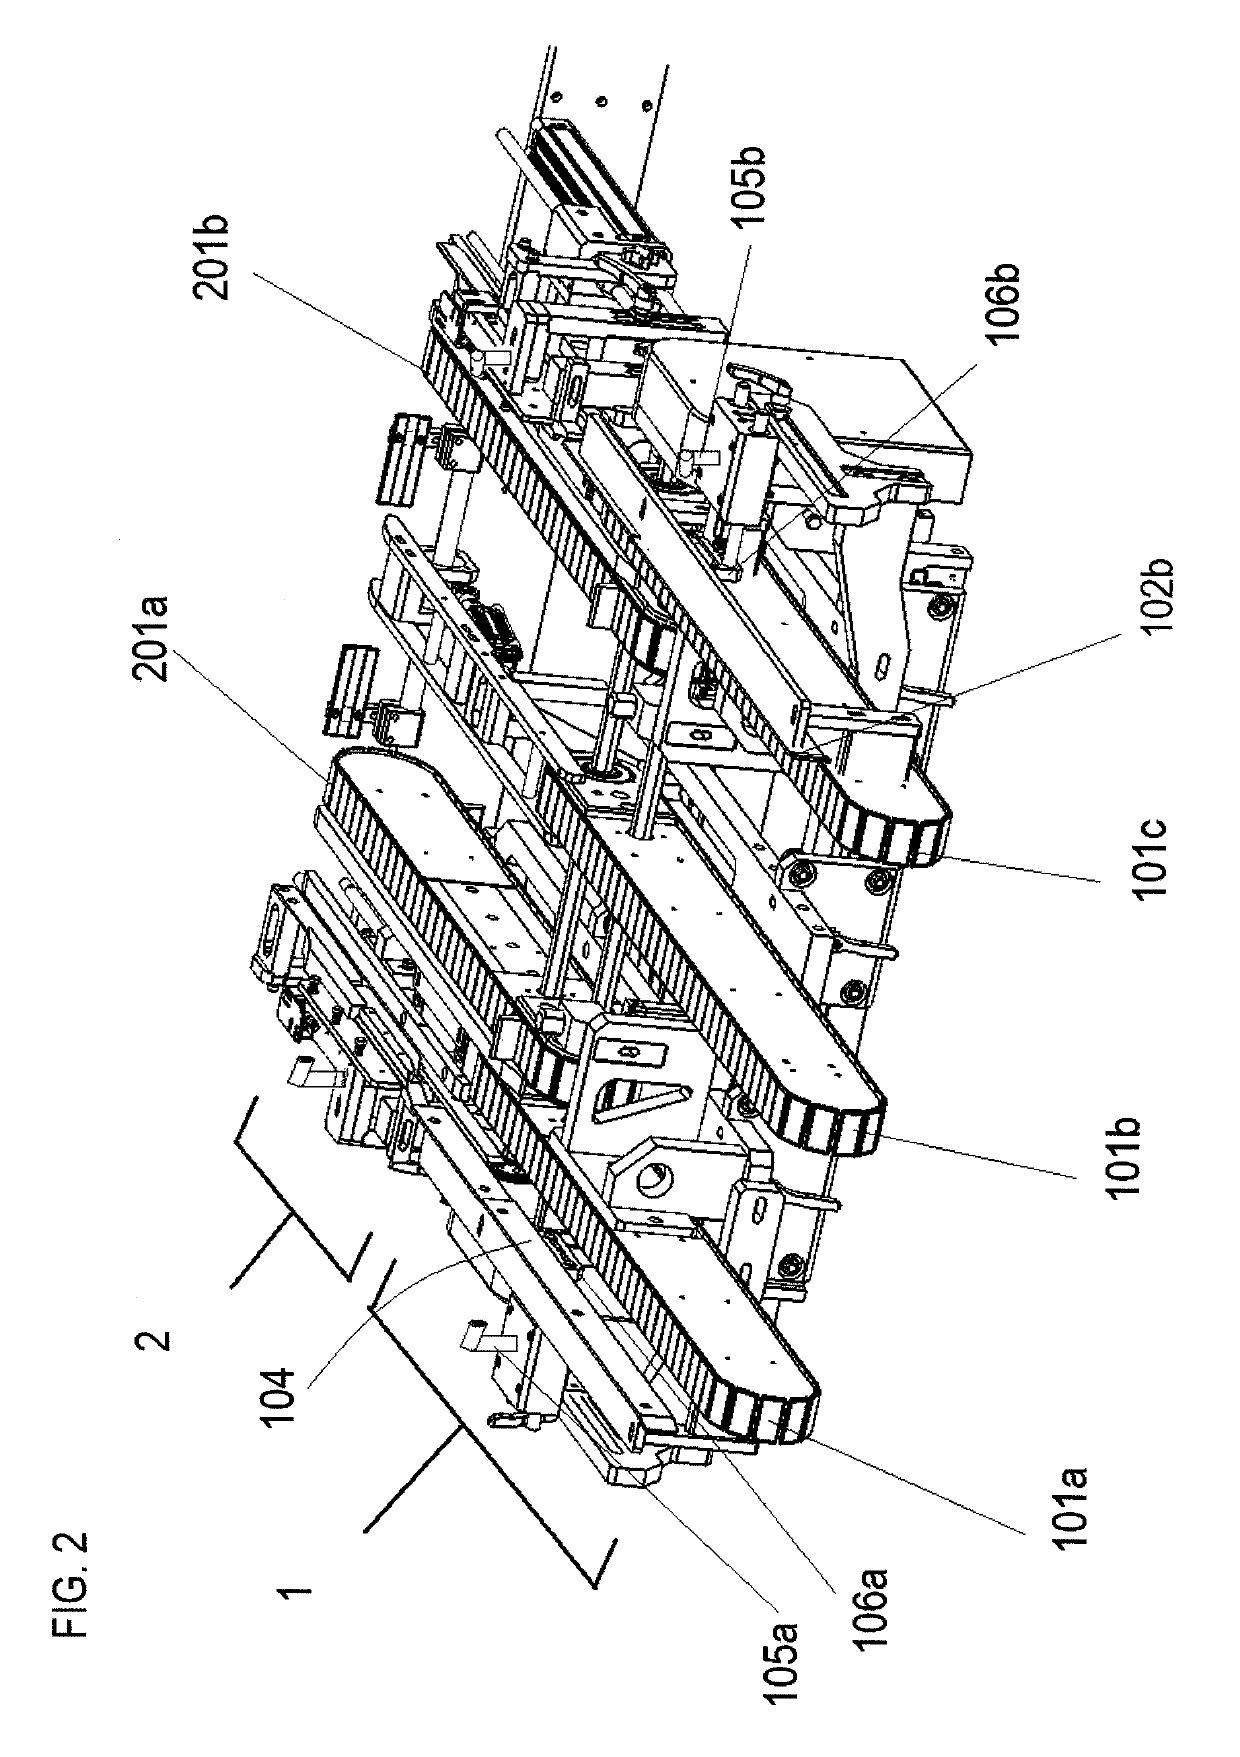 High speed automated feeding system and methods of using the same